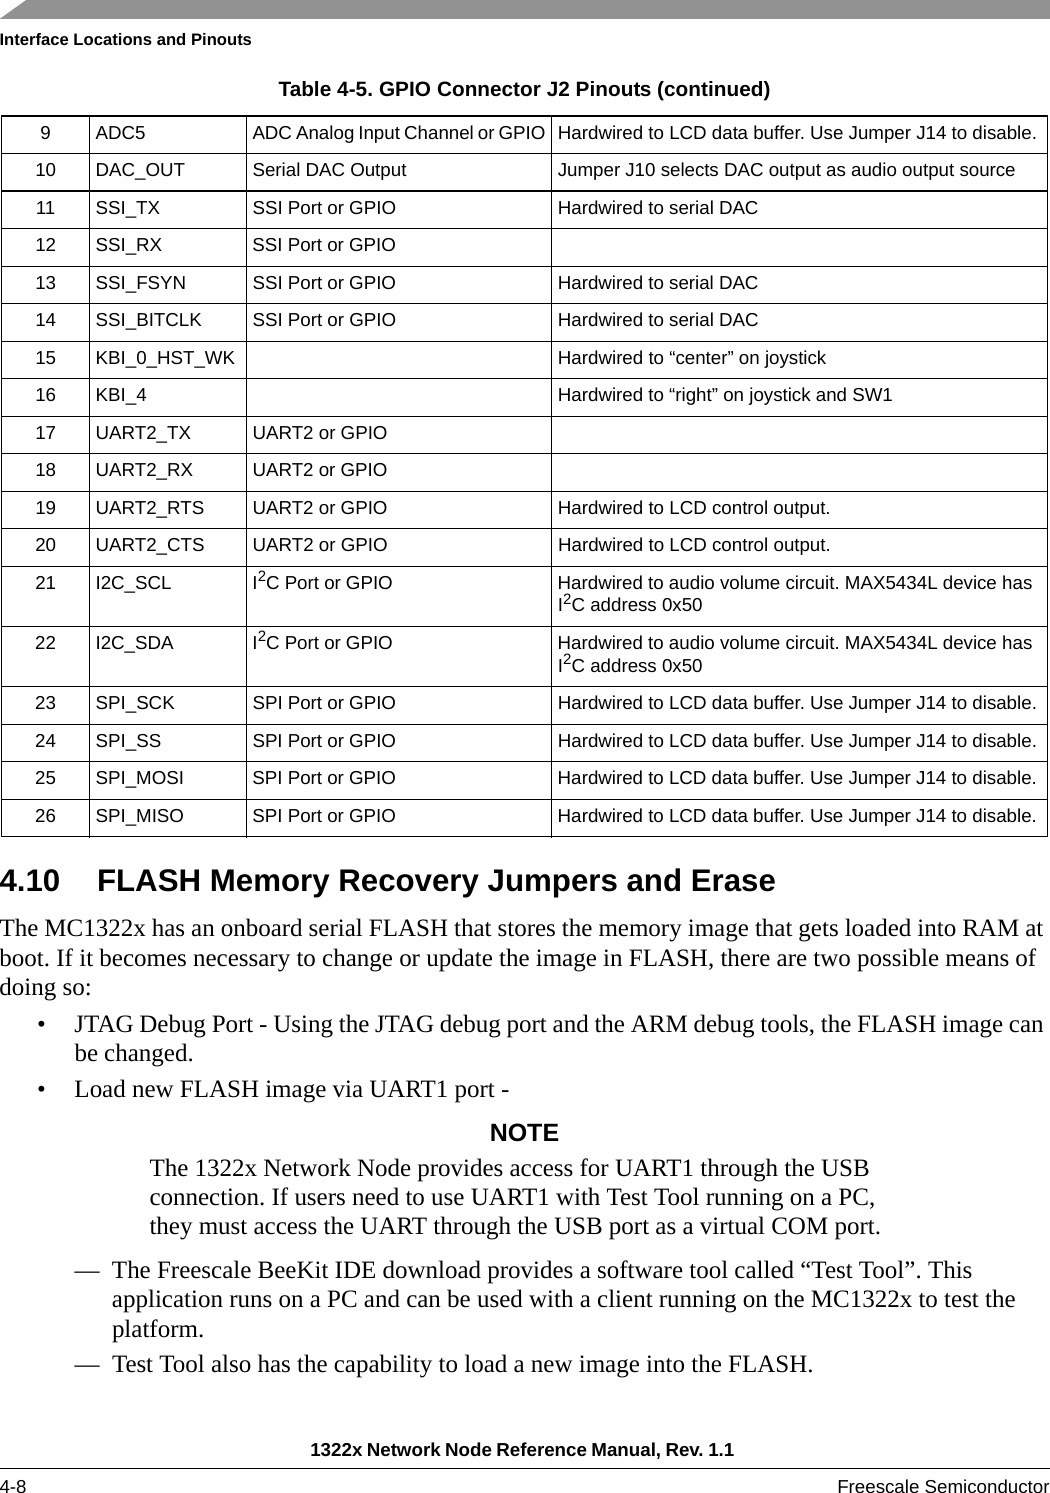 Interface Locations and Pinouts1322x Network Node Reference Manual, Rev. 1.1 4-8 Freescale Semiconductor4.10 FLASH Memory Recovery Jumpers and EraseThe MC1322x has an onboard serial FLASH that stores the memory image that gets loaded into RAM at boot. If it becomes necessary to change or update the image in FLASH, there are two possible means of doing so:• JTAG Debug Port - Using the JTAG debug port and the ARM debug tools, the FLASH image can be changed.• Load new FLASH image via UART1 port -NOTEThe 1322x Network Node provides access for UART1 through the USB connection. If users need to use UART1 with Test Tool running on a PC, they must access the UART through the USB port as a virtual COM port.— The Freescale BeeKit IDE download provides a software tool called “Test Tool”. This application runs on a PC and can be used with a client running on the MC1322x to test the platform.— Test Tool also has the capability to load a new image into the FLASH.9 ADC5 ADC Analog Input Channel or GPIO Hardwired to LCD data buffer. Use Jumper J14 to disable.10 DAC_OUT Serial DAC Output Jumper J10 selects DAC output as audio output source11 SSI_TX SSI Port or GPIO Hardwired to serial DAC12 SSI_RX SSI Port or GPIO13 SSI_FSYN SSI Port or GPIO Hardwired to serial DAC14 SSI_BITCLK SSI Port or GPIO Hardwired to serial DAC15 KBI_0_HST_WK Hardwired to “center” on joystick16 KBI_4 Hardwired to “right” on joystick and SW117 UART2_TX UART2 or GPIO18 UART2_RX UART2 or GPIO19 UART2_RTS UART2 or GPIO Hardwired to LCD control output.20 UART2_CTS UART2 or GPIO Hardwired to LCD control output.21 I2C_SCL I2C Port or GPIO Hardwired to audio volume circuit. MAX5434L device has I2C address 0x5022 I2C_SDA I2C Port or GPIO Hardwired to audio volume circuit. MAX5434L device has I2C address 0x5023 SPI_SCK SPI Port or GPIO Hardwired to LCD data buffer. Use Jumper J14 to disable.24 SPI_SS SPI Port or GPIO Hardwired to LCD data buffer. Use Jumper J14 to disable.25 SPI_MOSI SPI Port or GPIO Hardwired to LCD data buffer. Use Jumper J14 to disable.26 SPI_MISO SPI Port or GPIO Hardwired to LCD data buffer. Use Jumper J14 to disable.Table 4-5. GPIO Connector J2 Pinouts (continued)